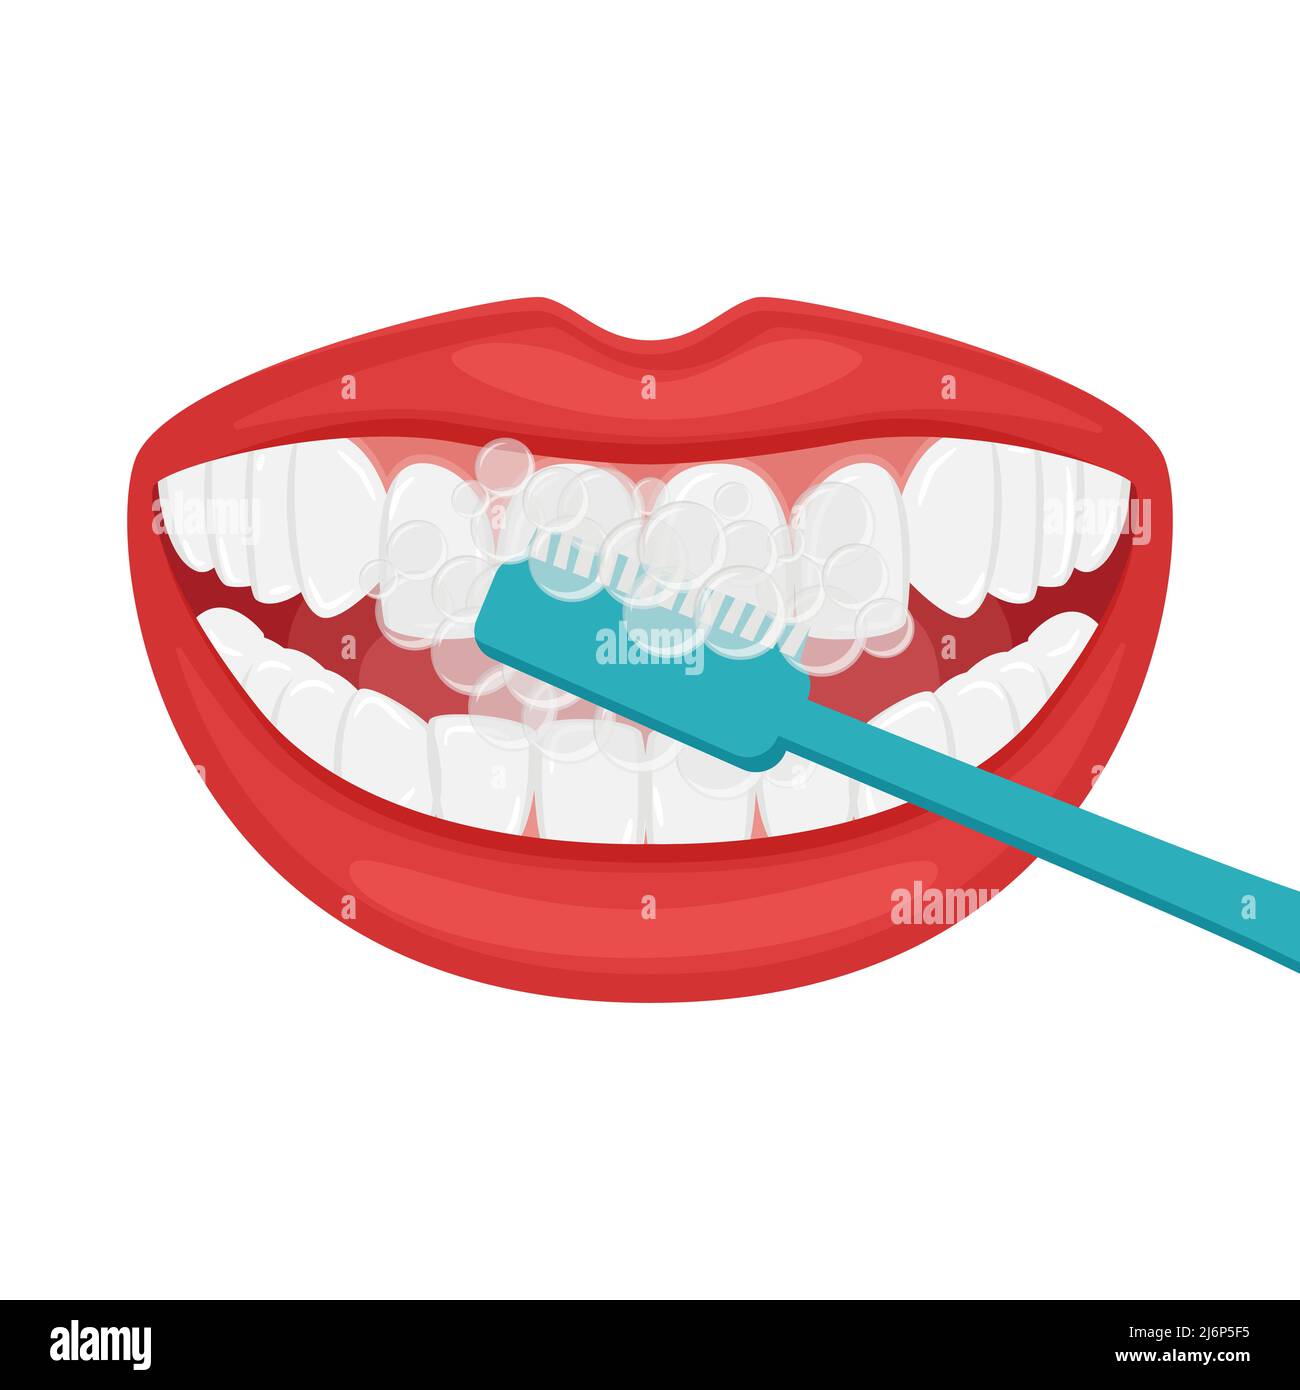 Smiling open mouth. Brushing your teeth with a toothbrush. Beautiful even white teeth and plump female lips. Oral hygiene and care. Healthy lifestyle. Stock Vector